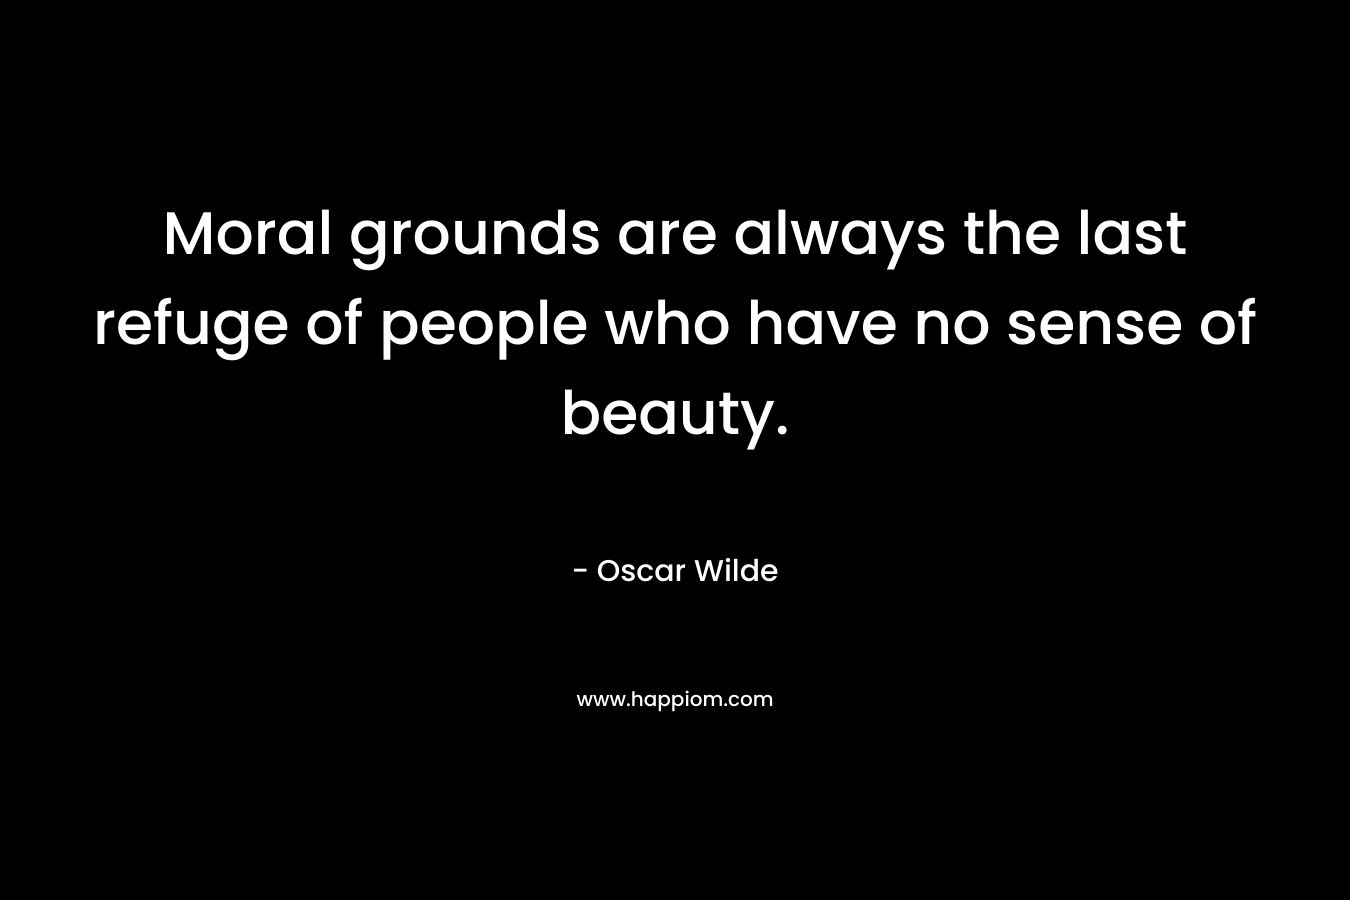 Moral grounds are always the last refuge of people who have no sense of beauty. – Oscar Wilde